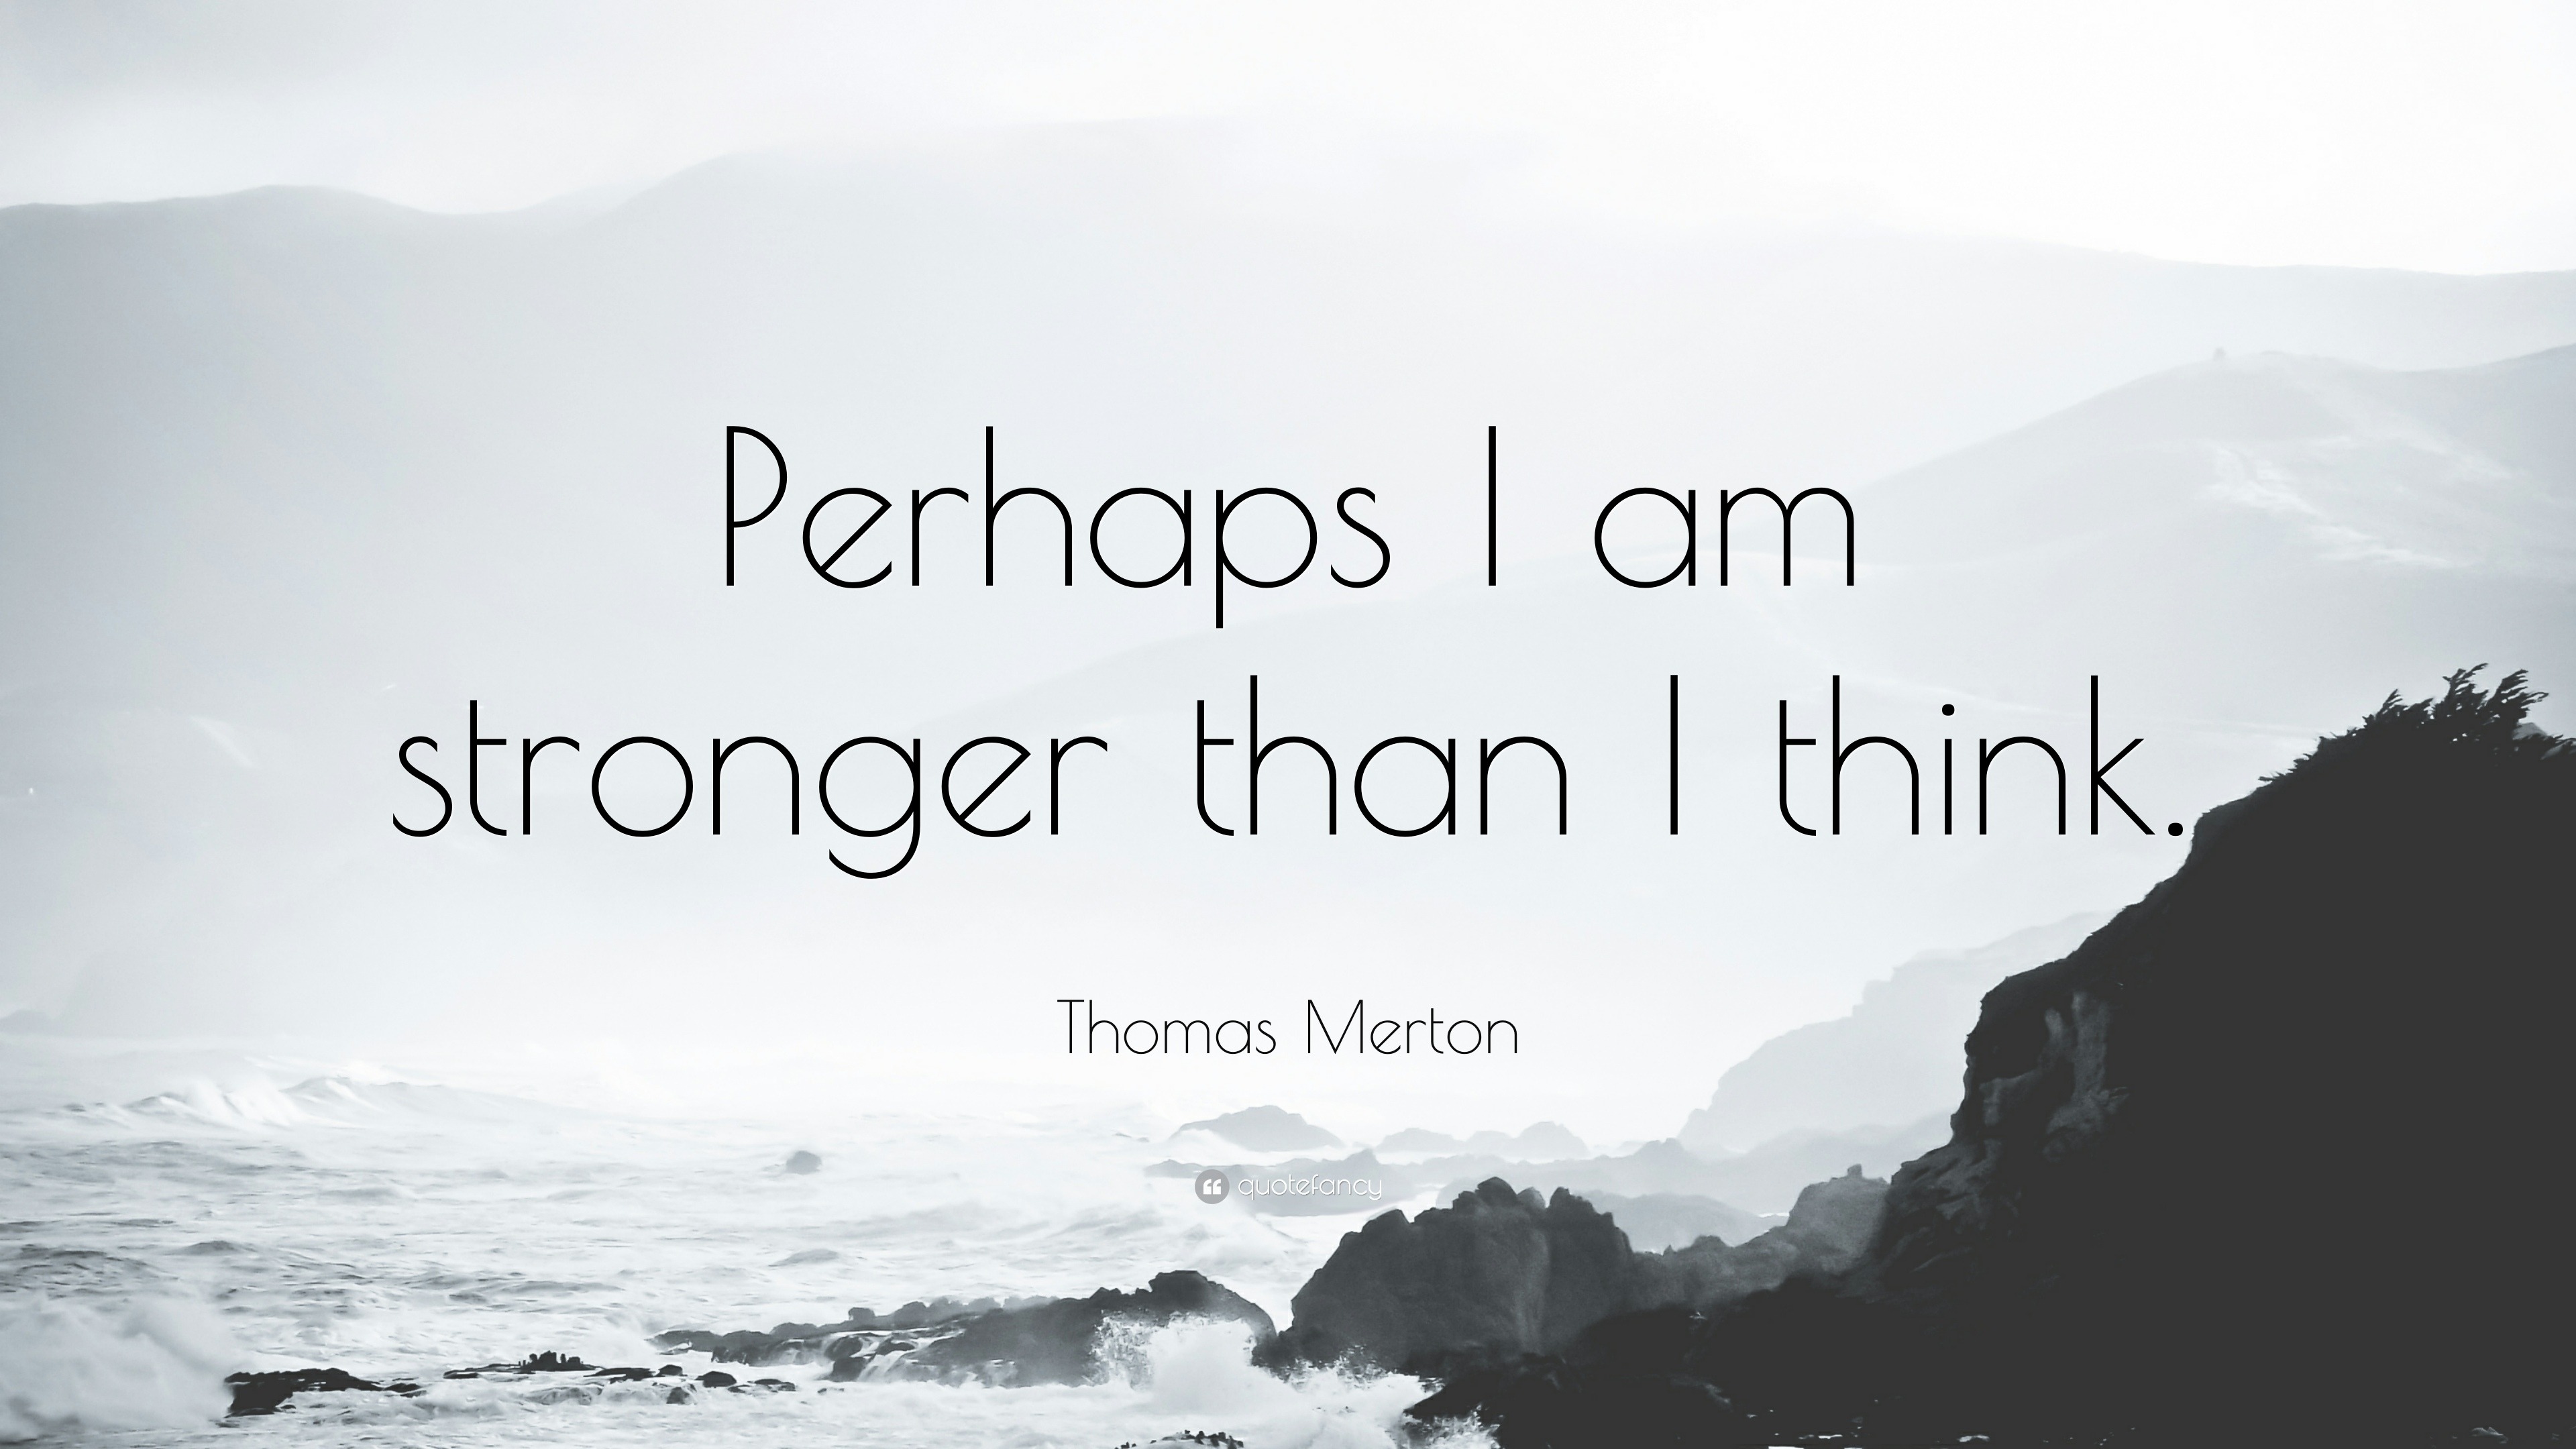 Thomas Merton Quote: "Perhaps I am stronger than I think." (24 wallpapers) - Quotefancy